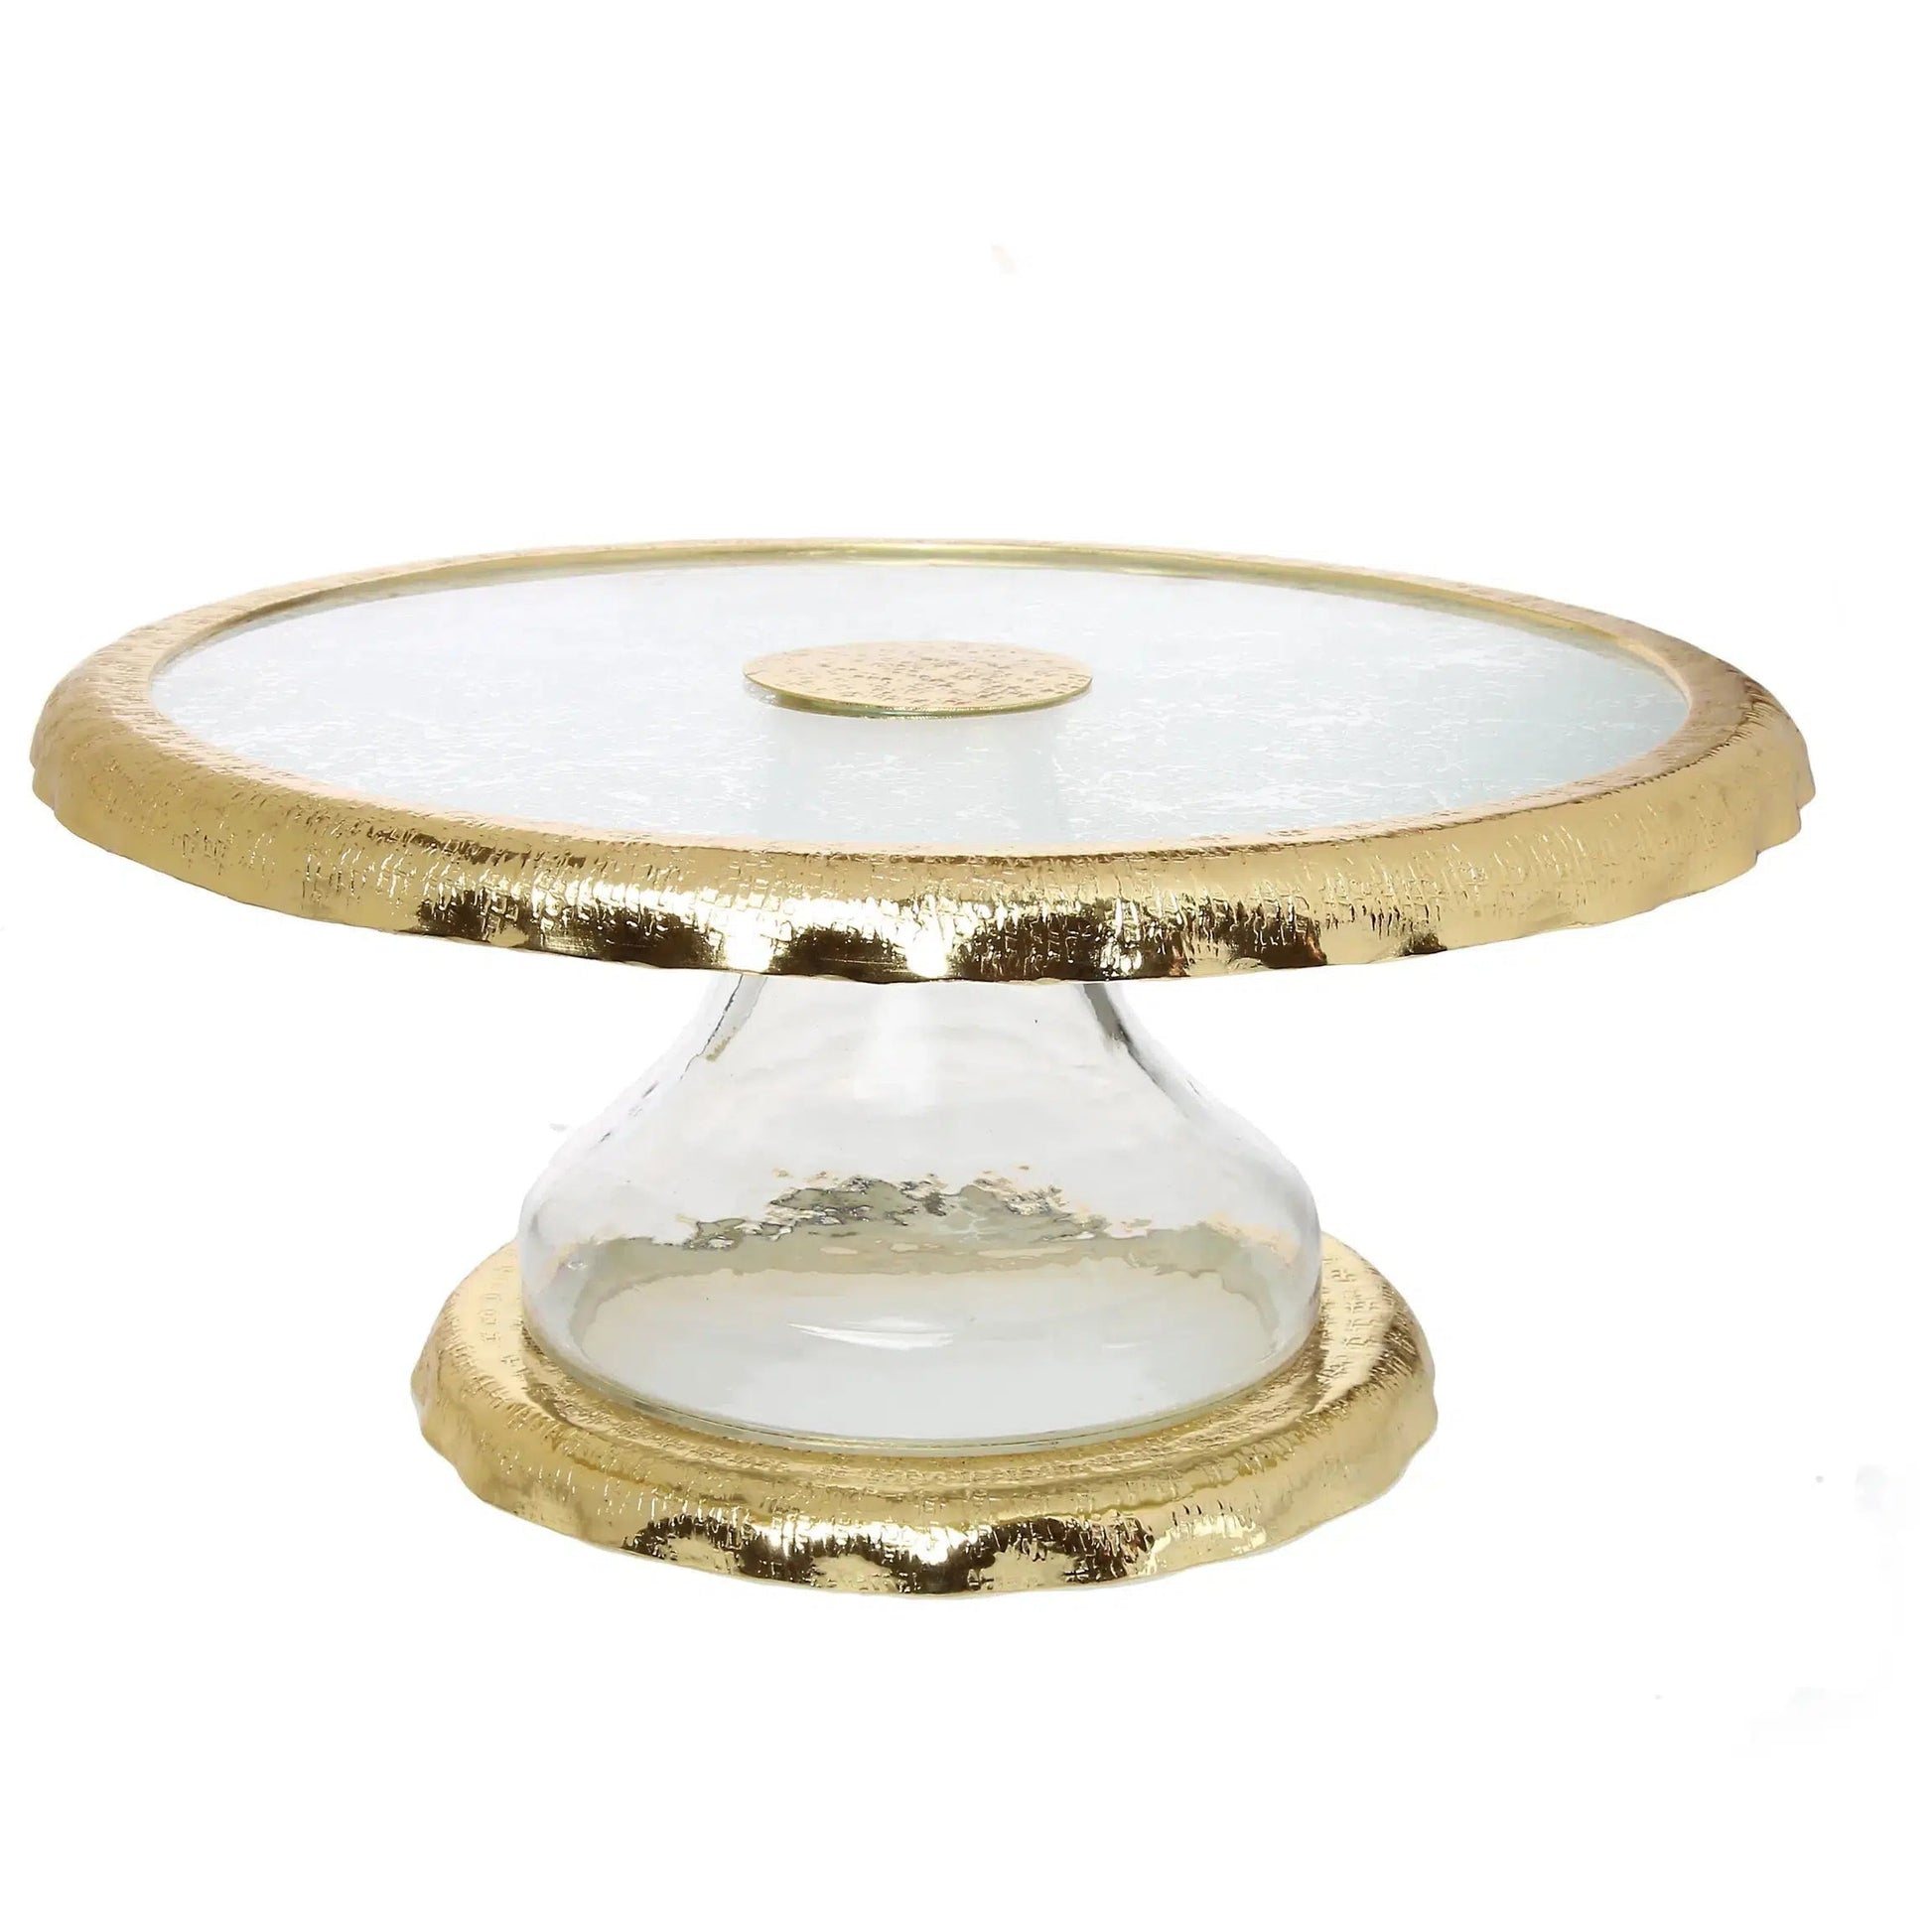 Glass Cake Stand with Gold Ruffle Border Cake Stands High Class Touch - Home Decor 